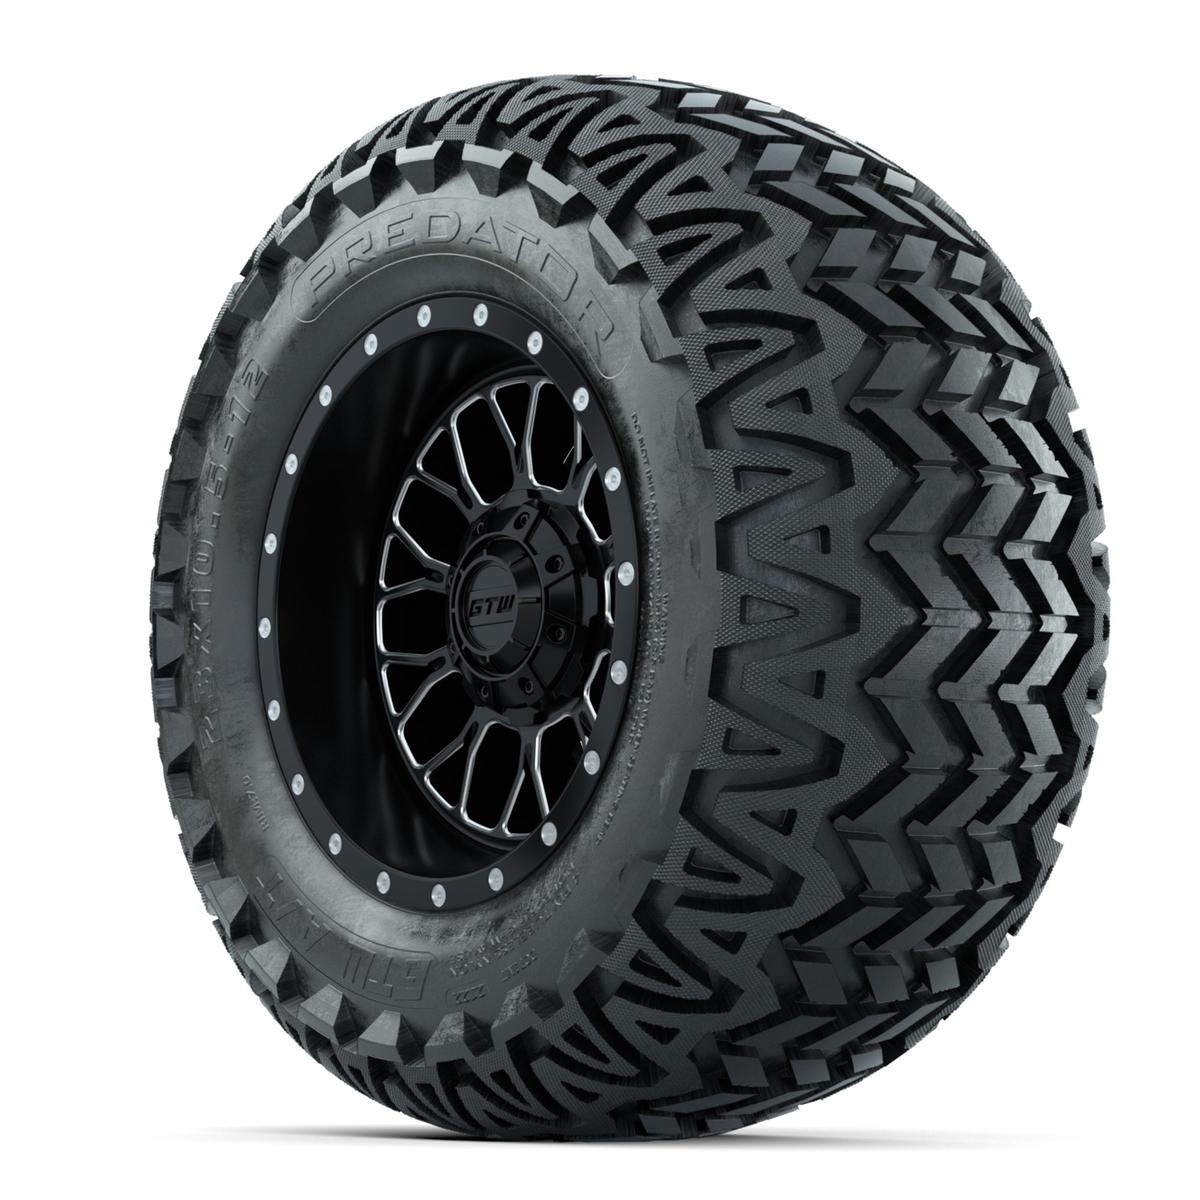 Set of (4) 12 in GTW® Helix Machined & Black Wheels with 23x10.5-12 Predator All-Terrain Tires